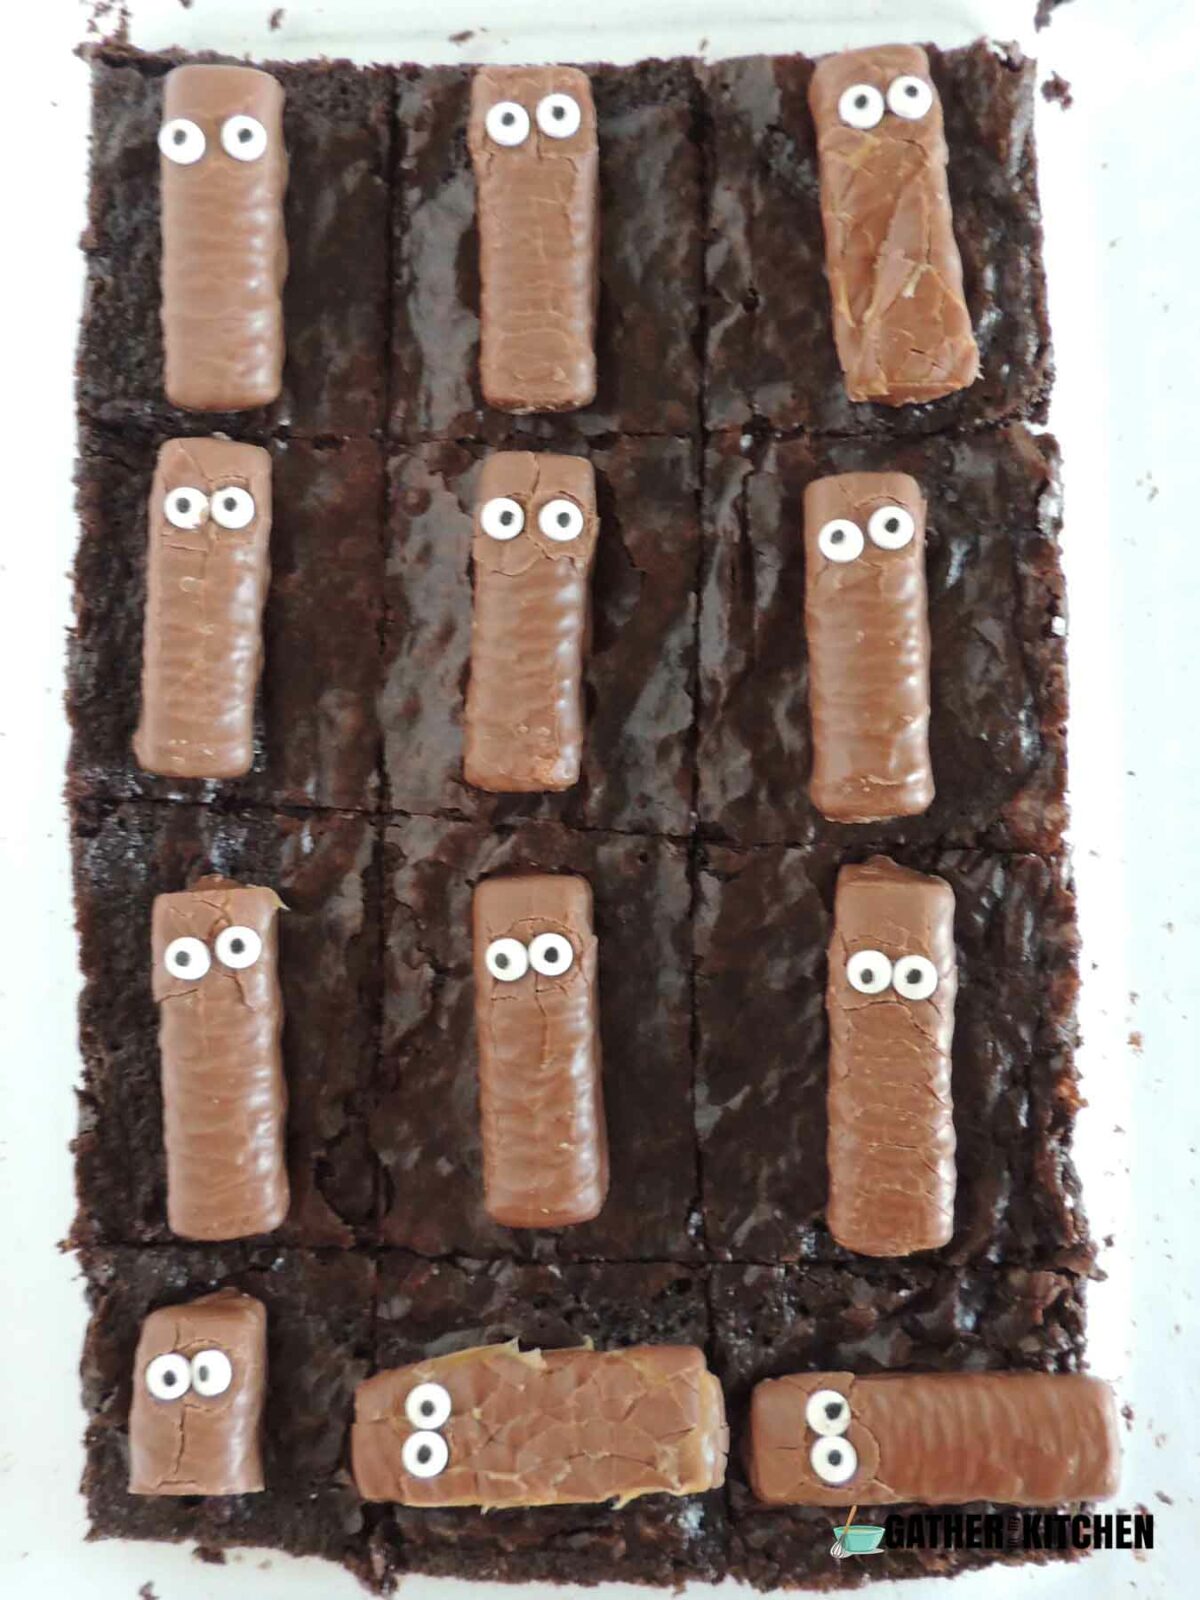 Mini Twix with googly eyes on top of brownies.